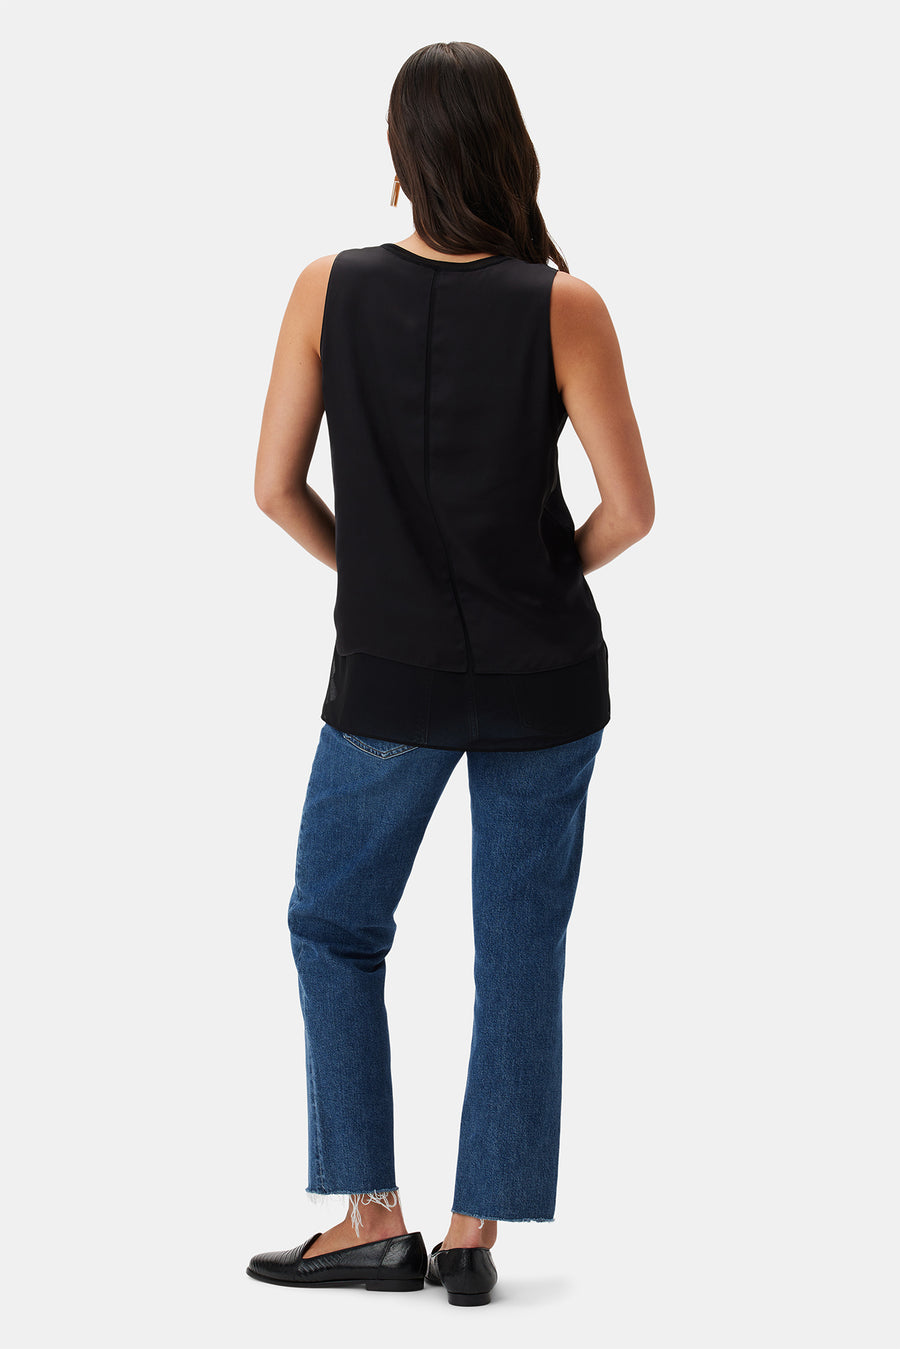 Zola Recycled Polyester Blouse - Black